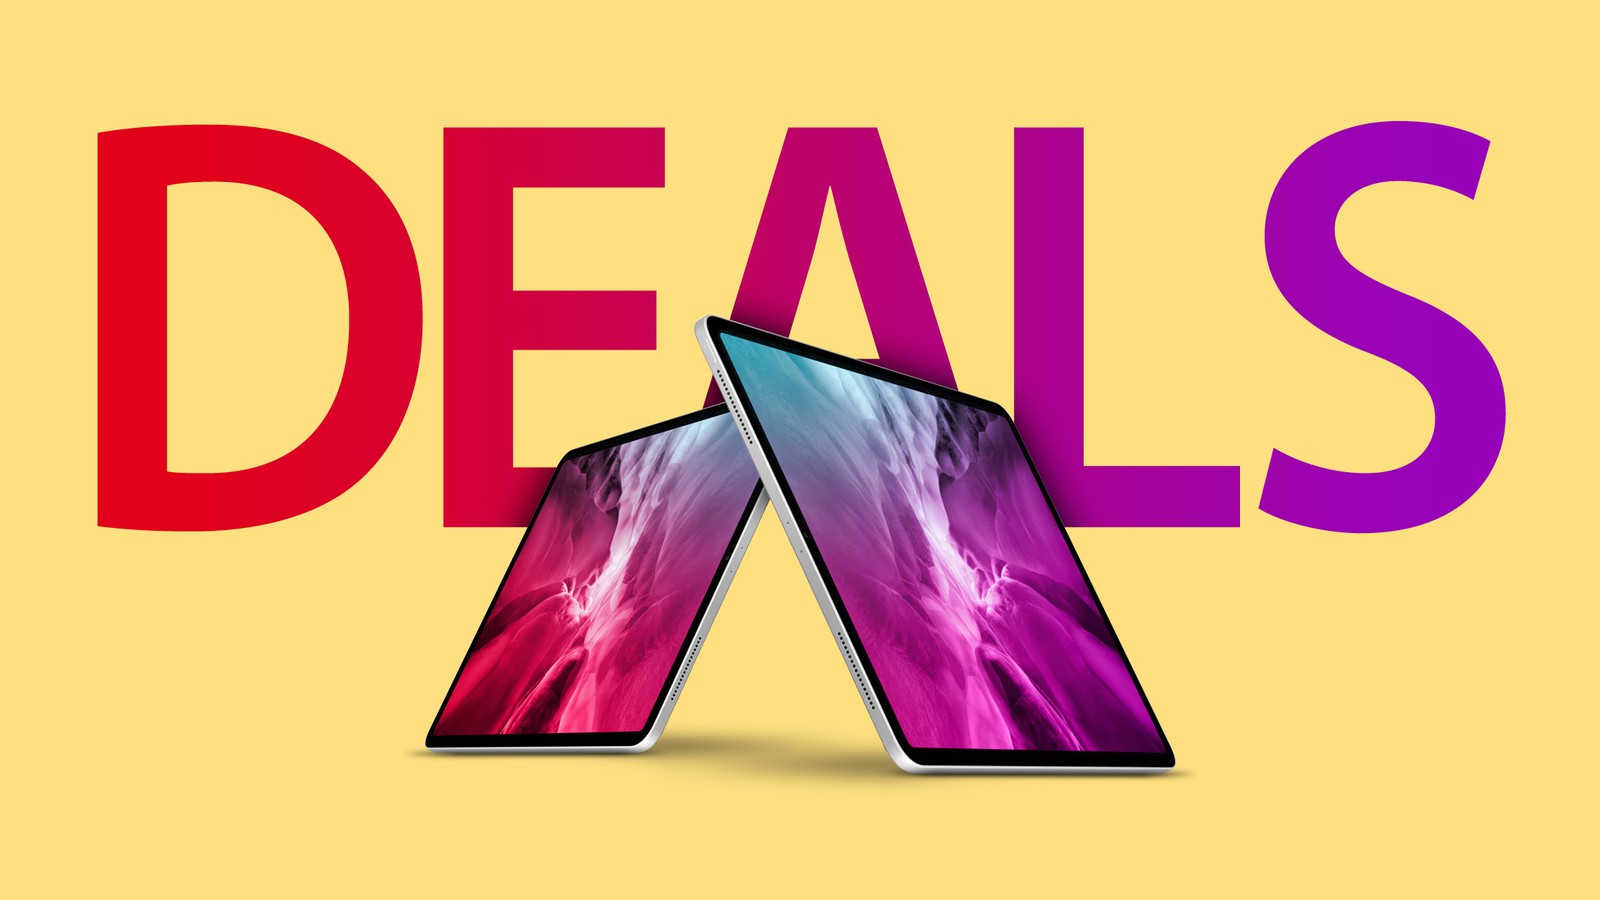 Deals: Amazon Taking Up to $100 Off 2021 iPad Pro Models ...